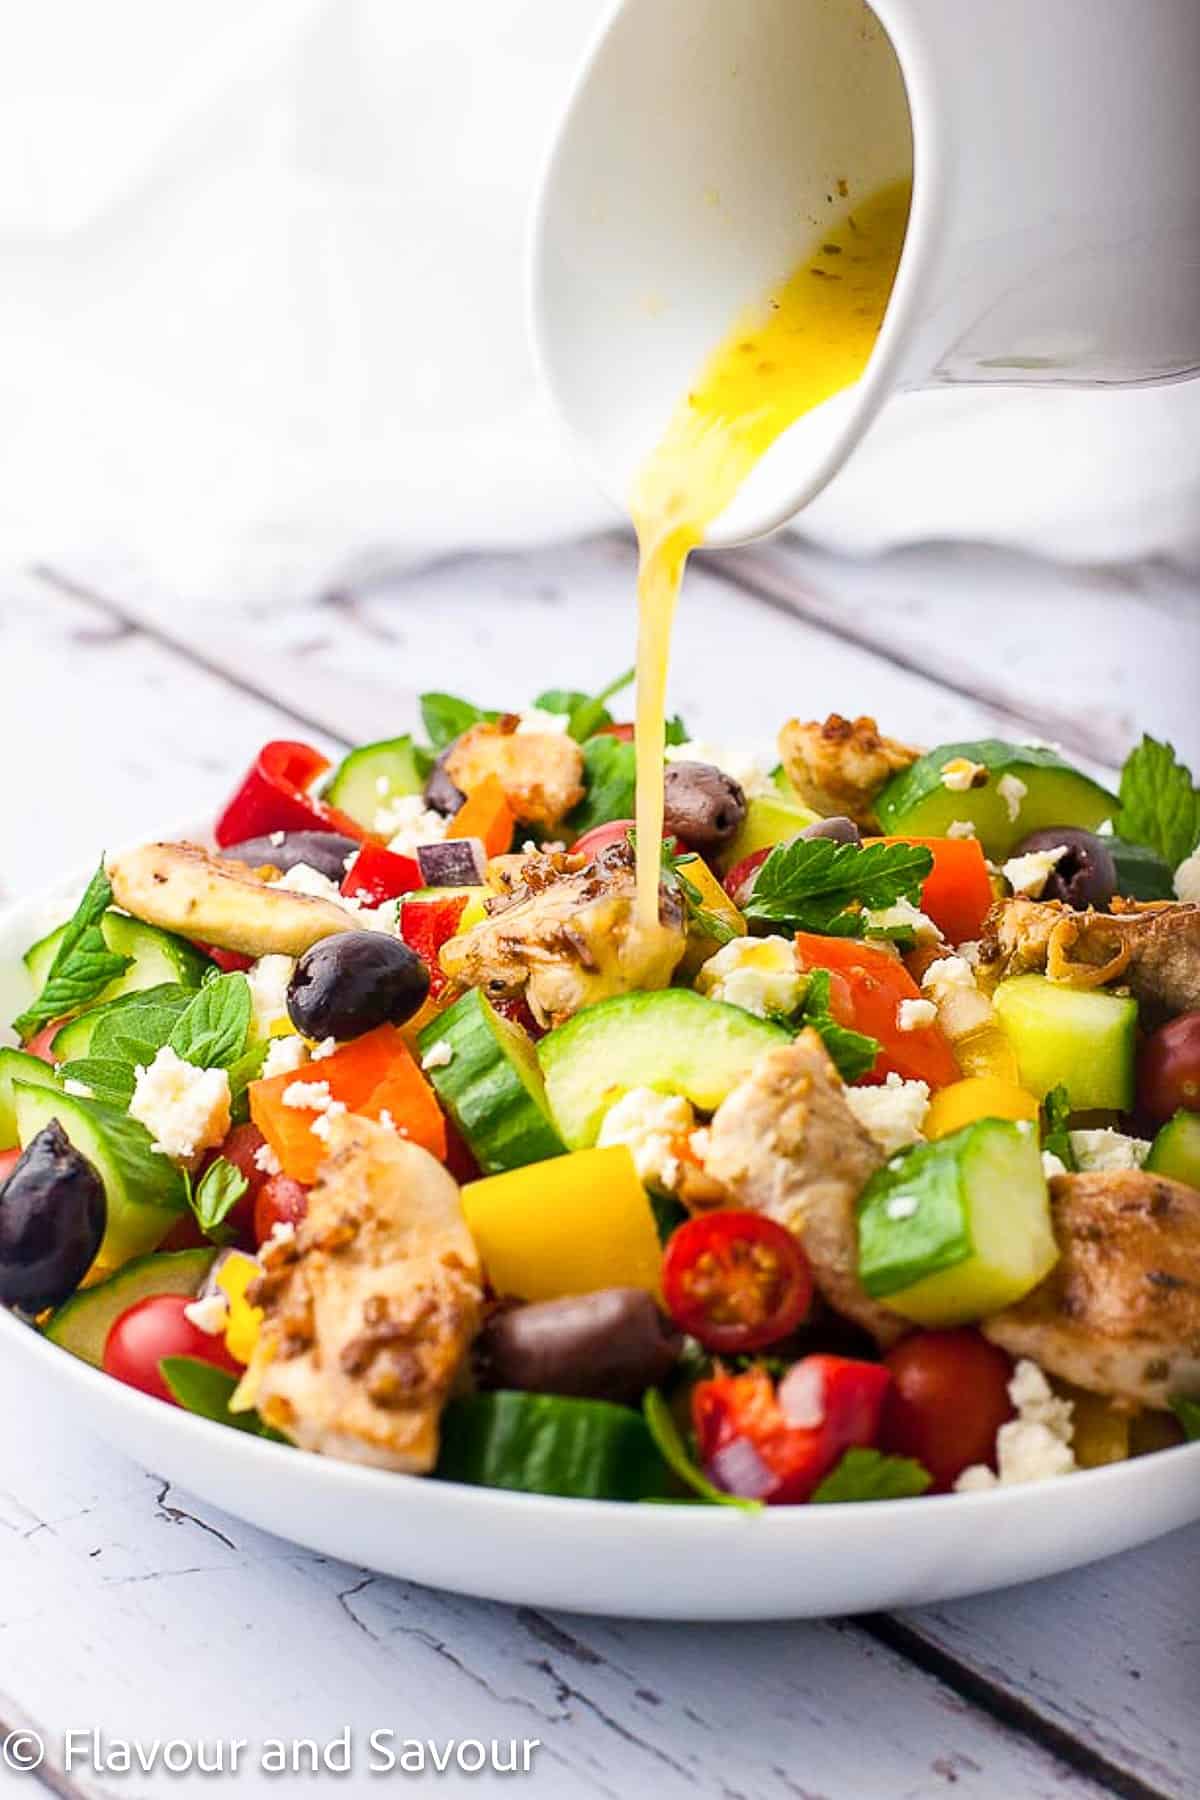 Adding dressing to Greek salad with grilled chicken.